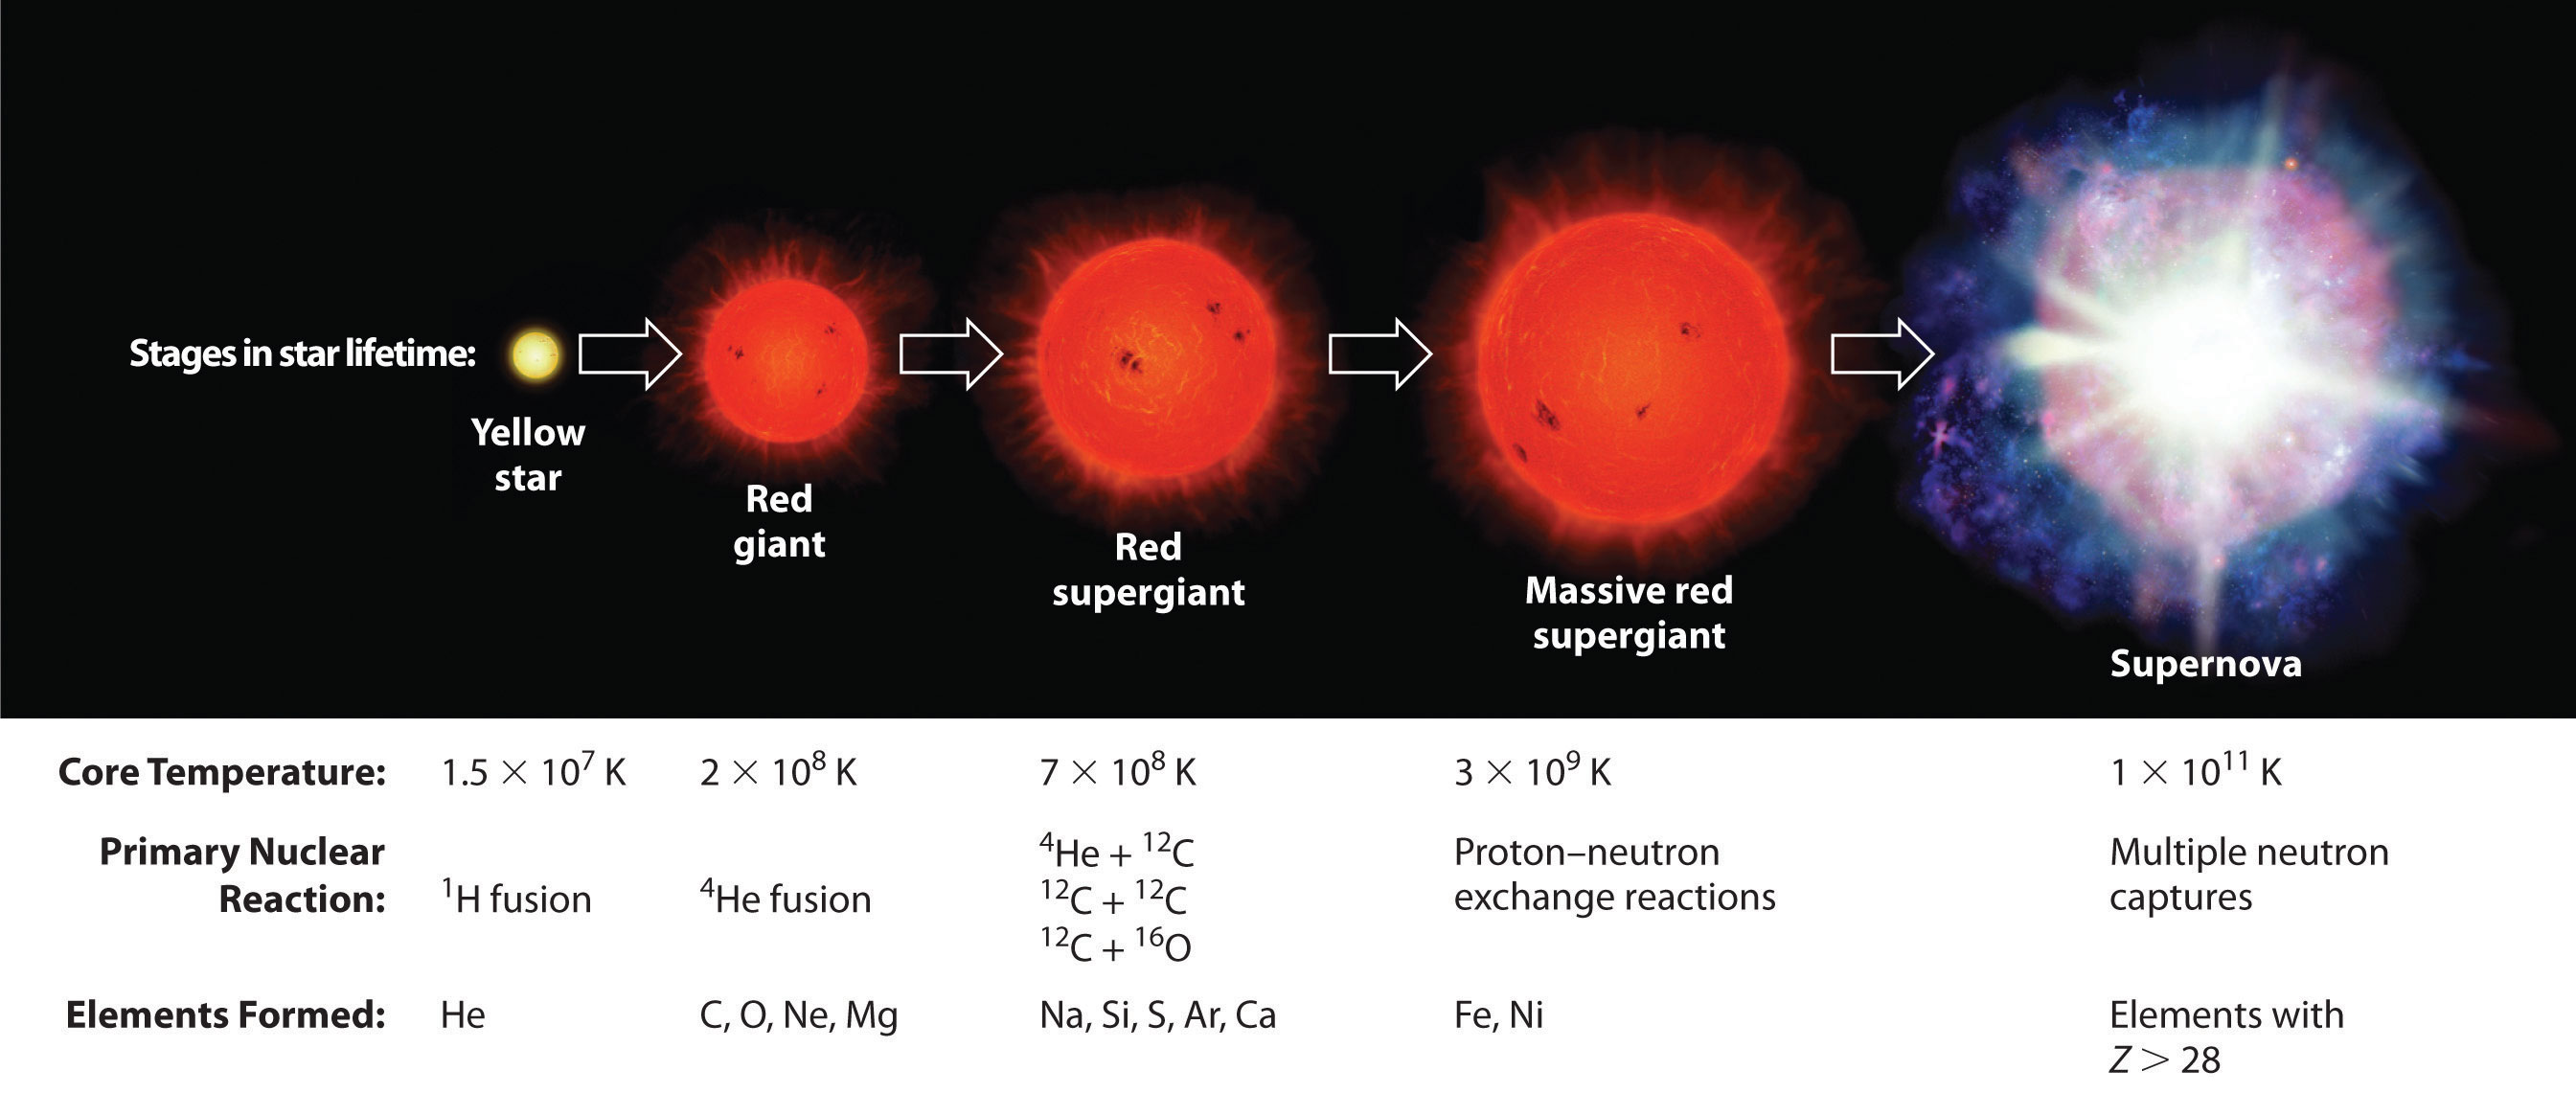 The stages in a stare lifetime are yellow star, red giant, red supergiant, massive red supergiant and finally supernova. 